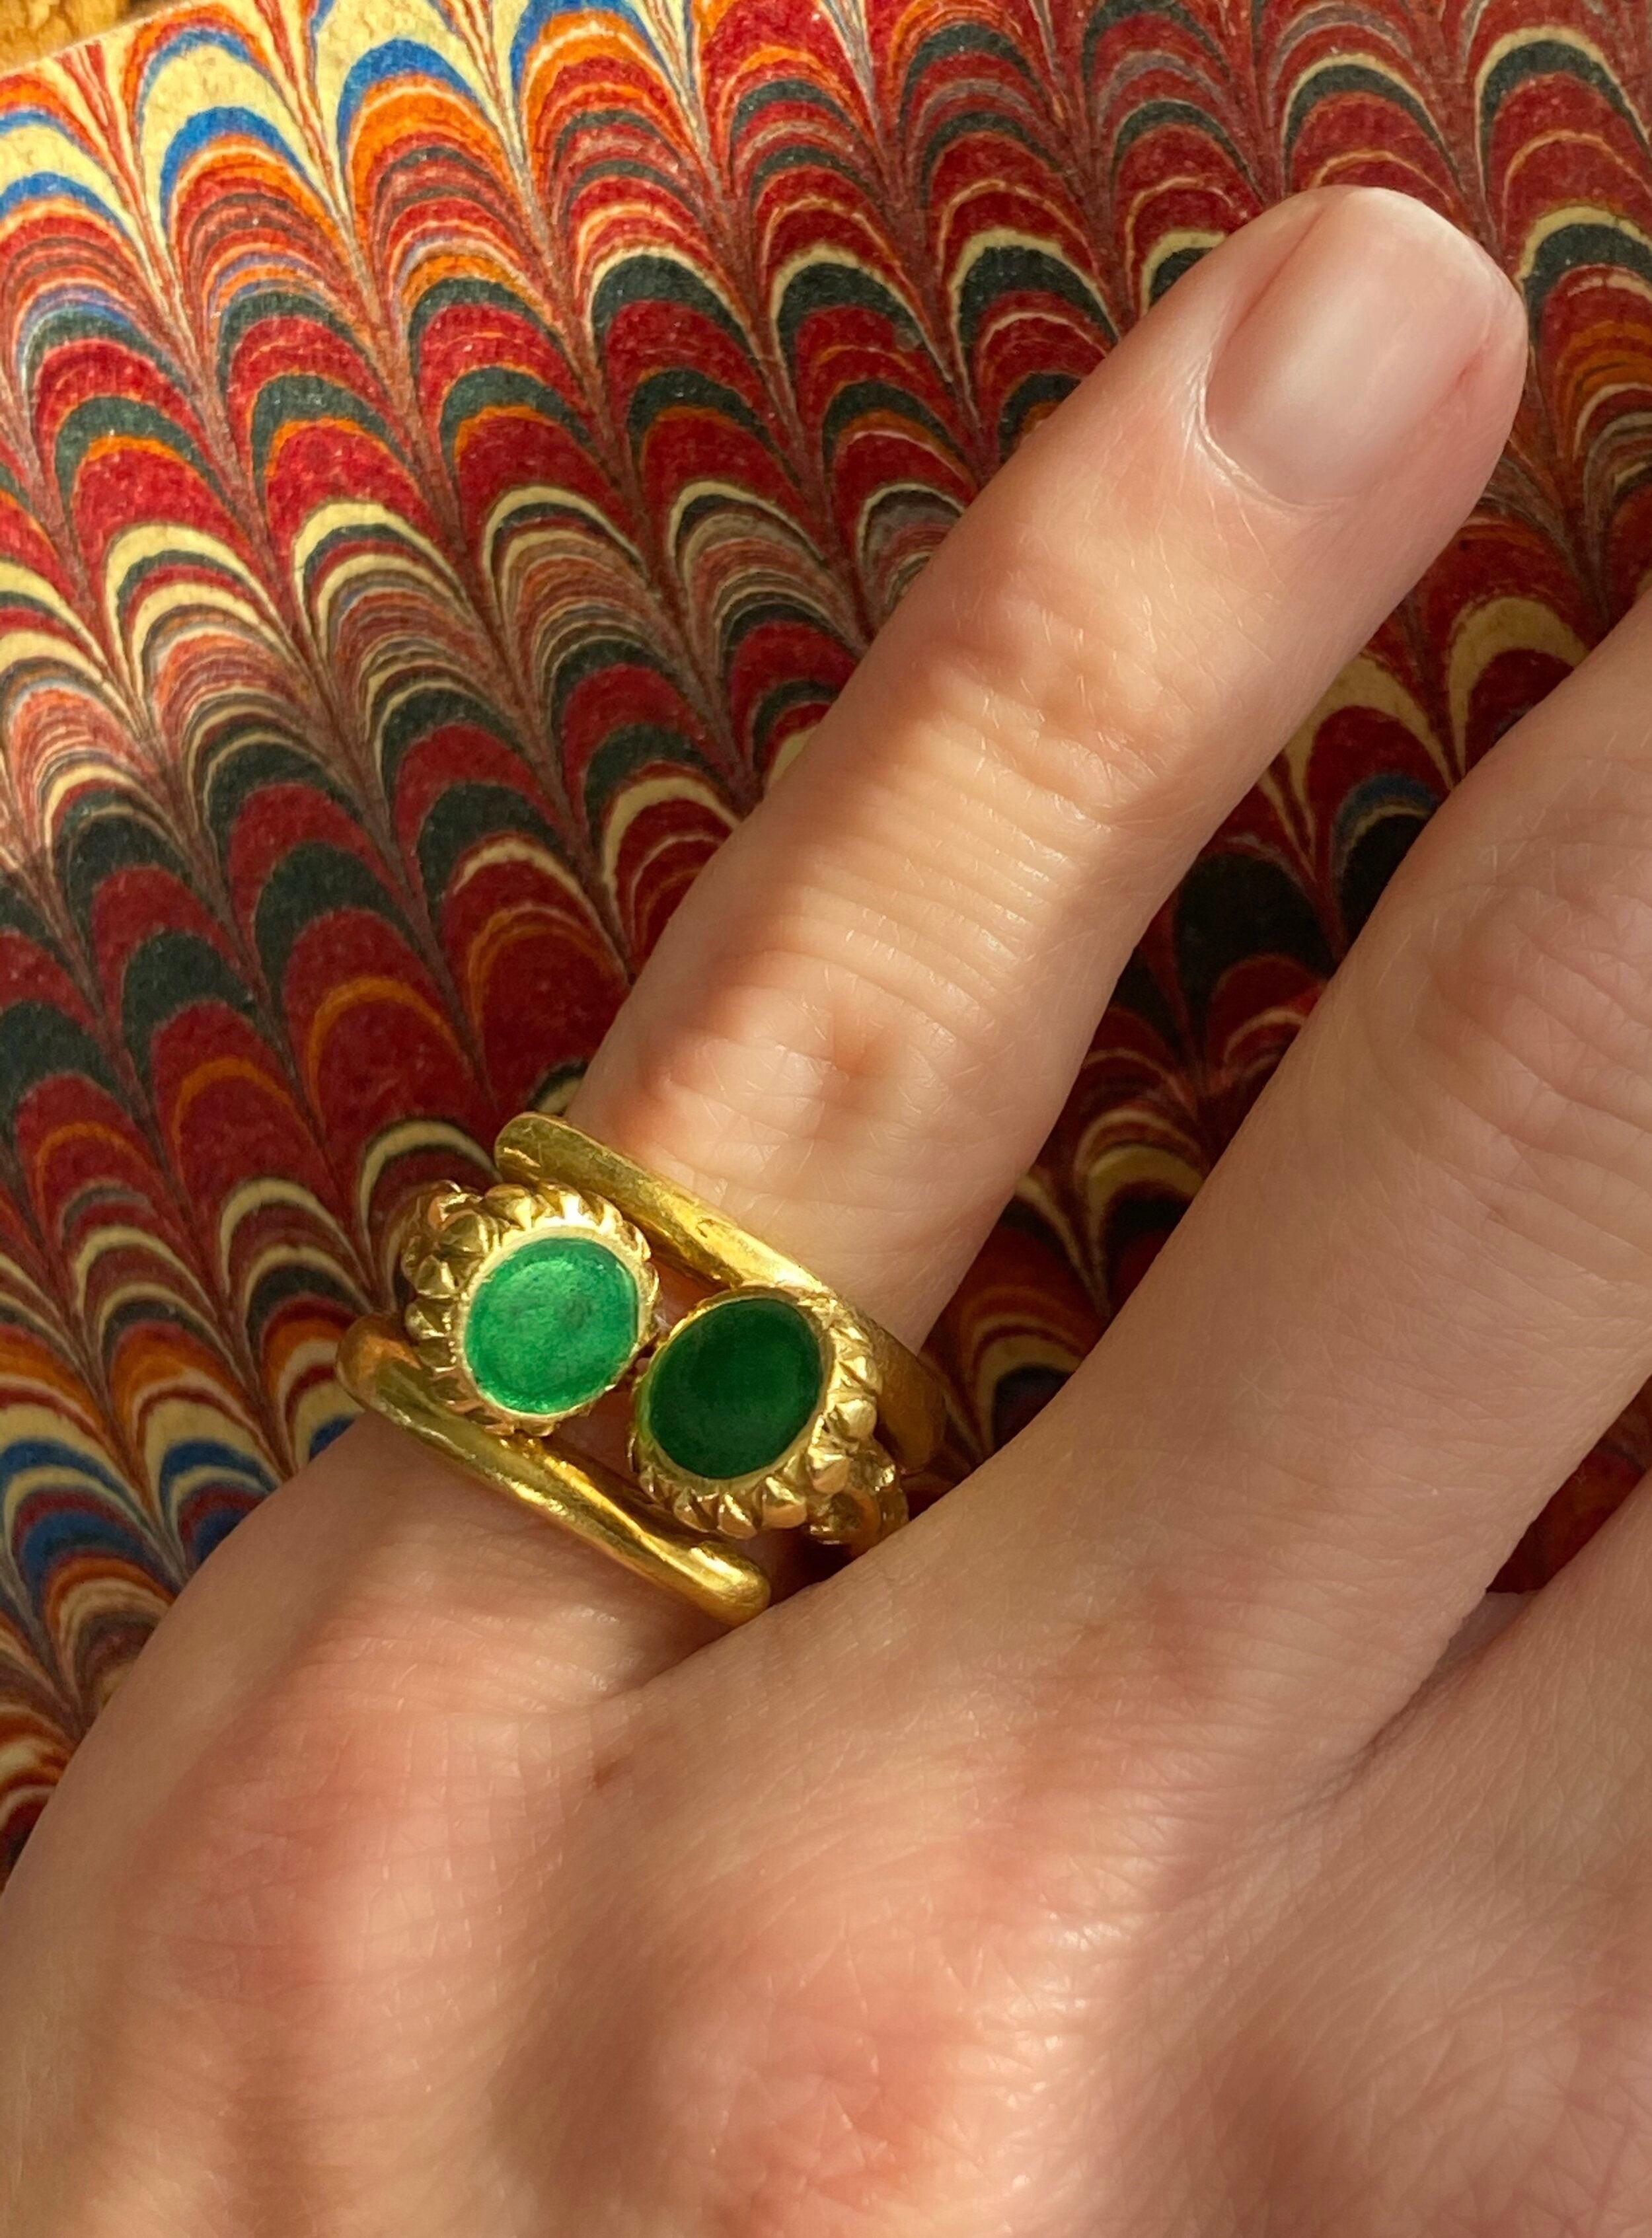 Vintage 18K Gioconda Green Enamel Bypass Nail Pinky Ring In Good Condition For Sale In Hummelstown, PA